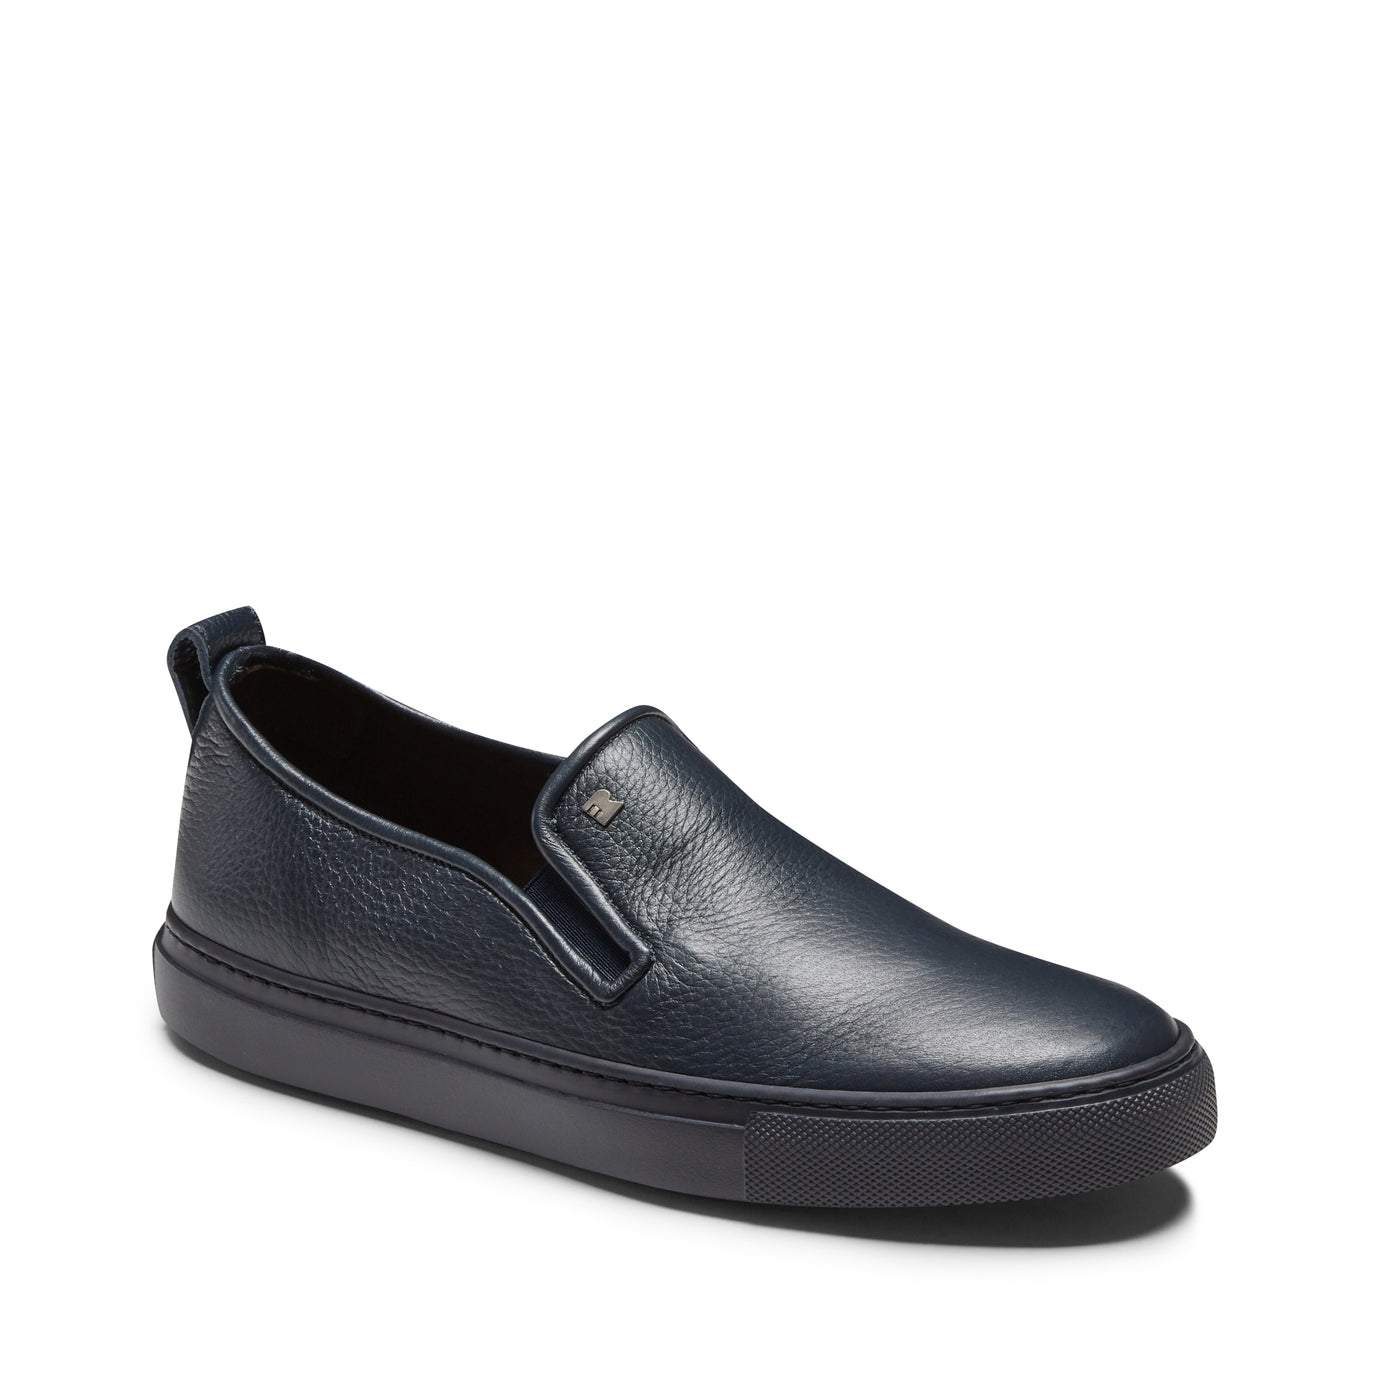 Shop The Latest Collection Of Fratelli Rossetti Fr M Loafer-46882 In Lebanon